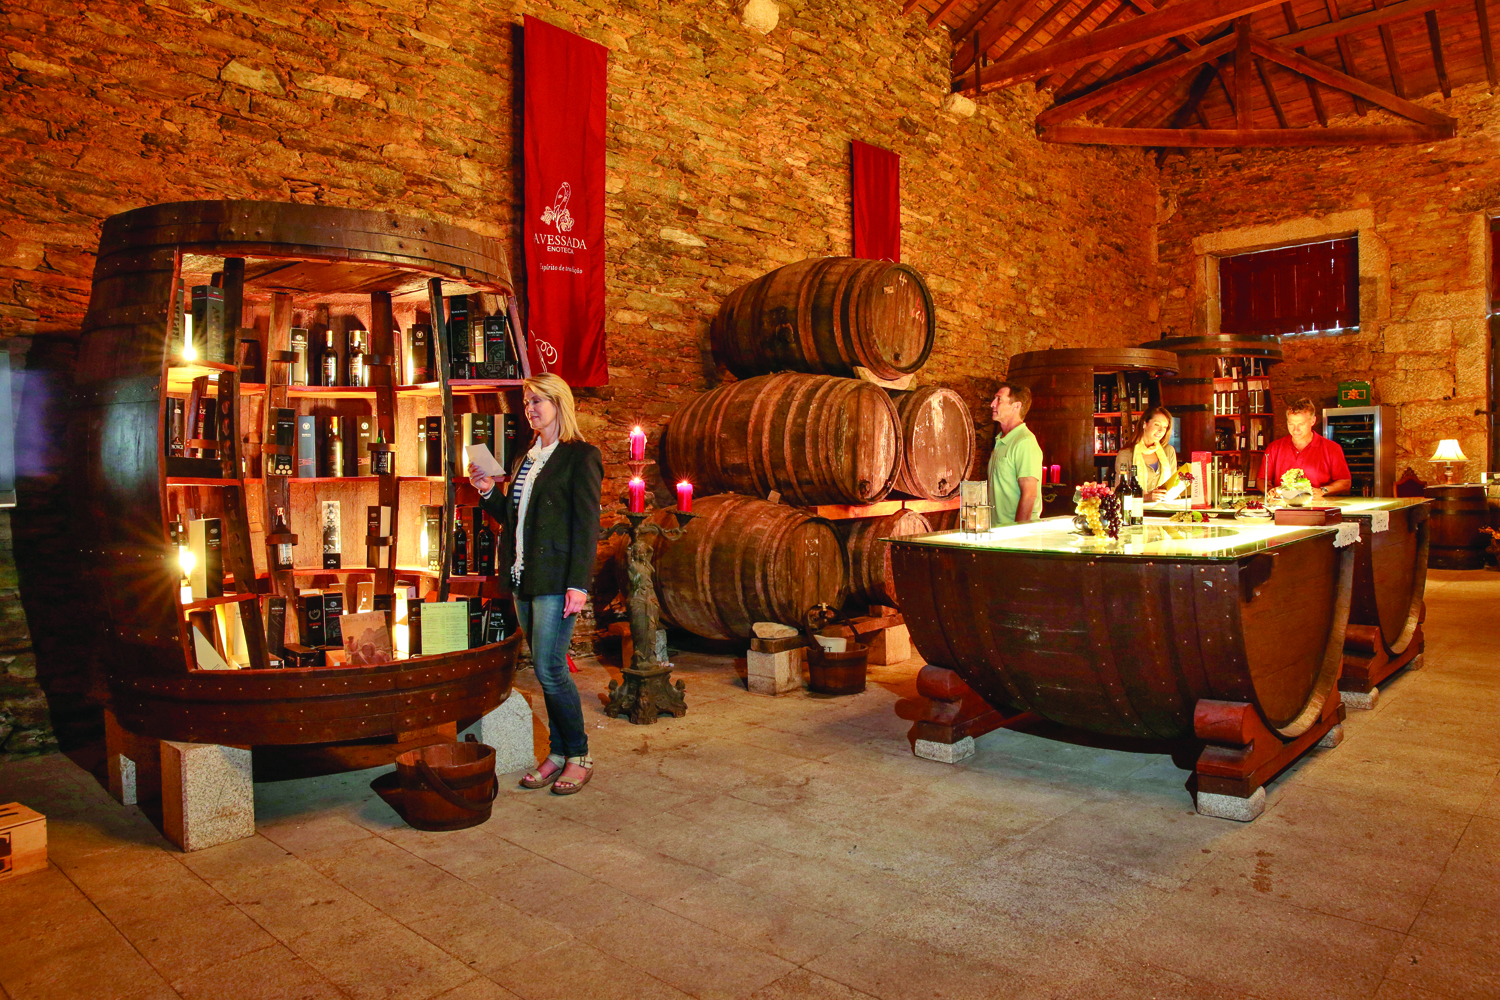 In Pinhao, Portugal, guests can visit a wine cellar.